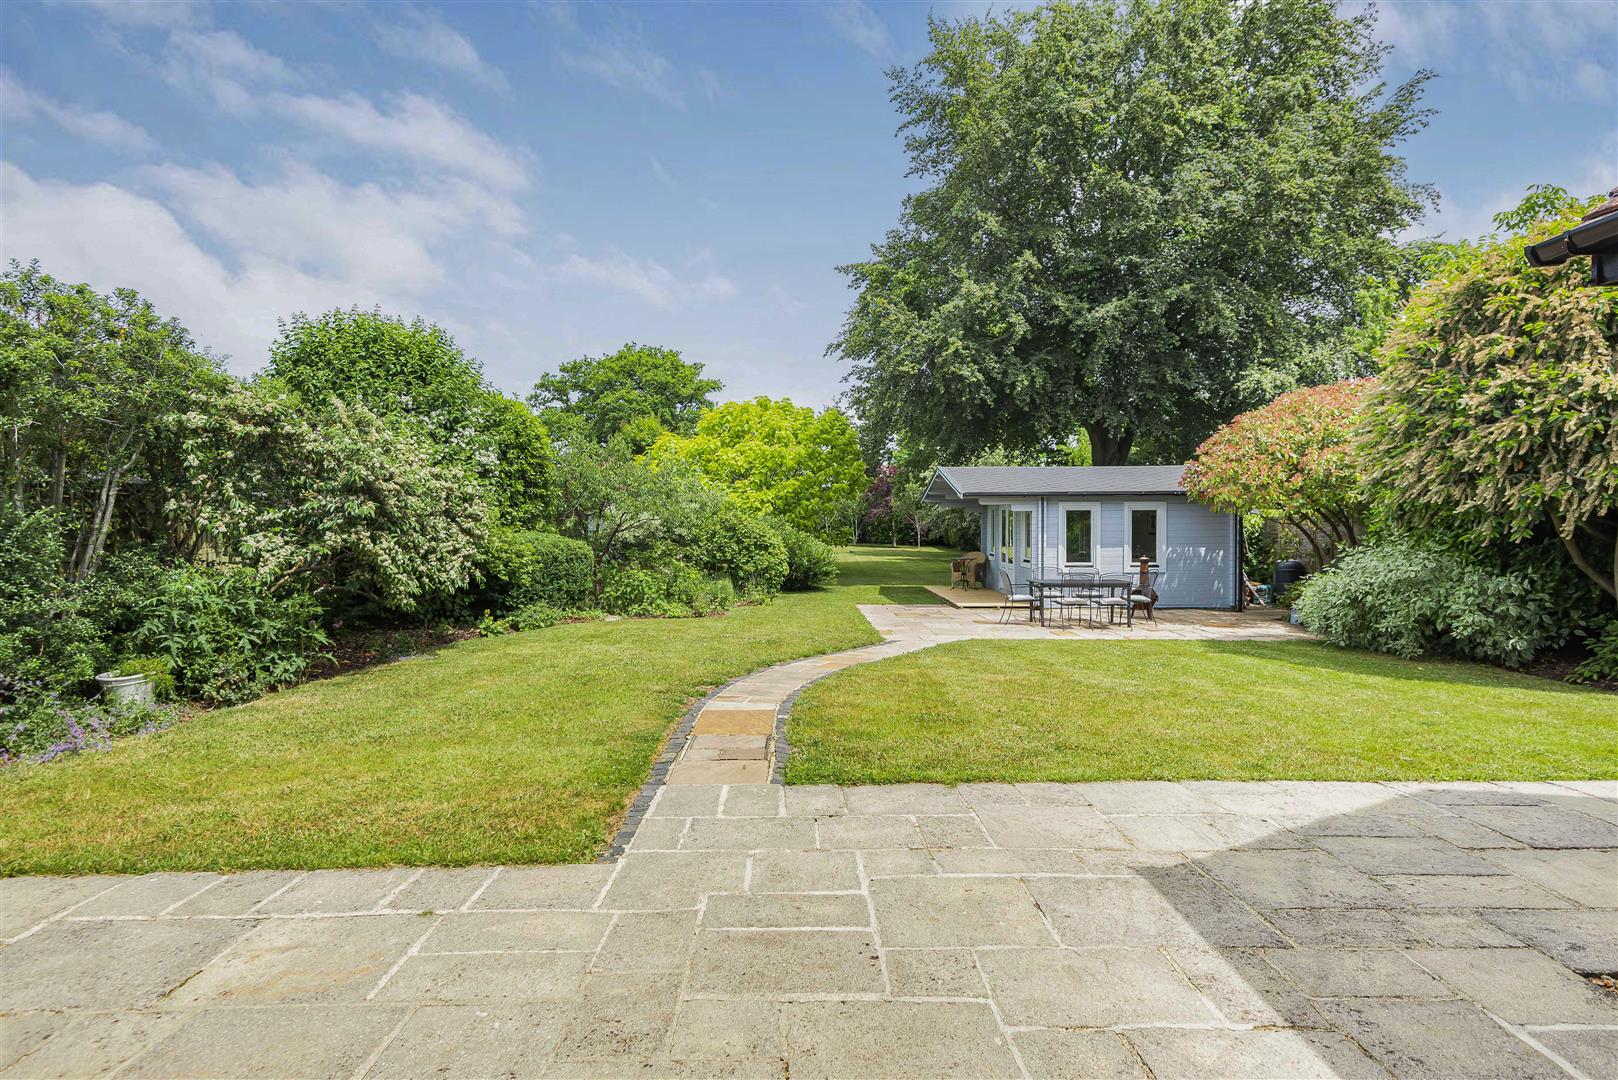 Wood Lane Kidmore End house for sale in Reading